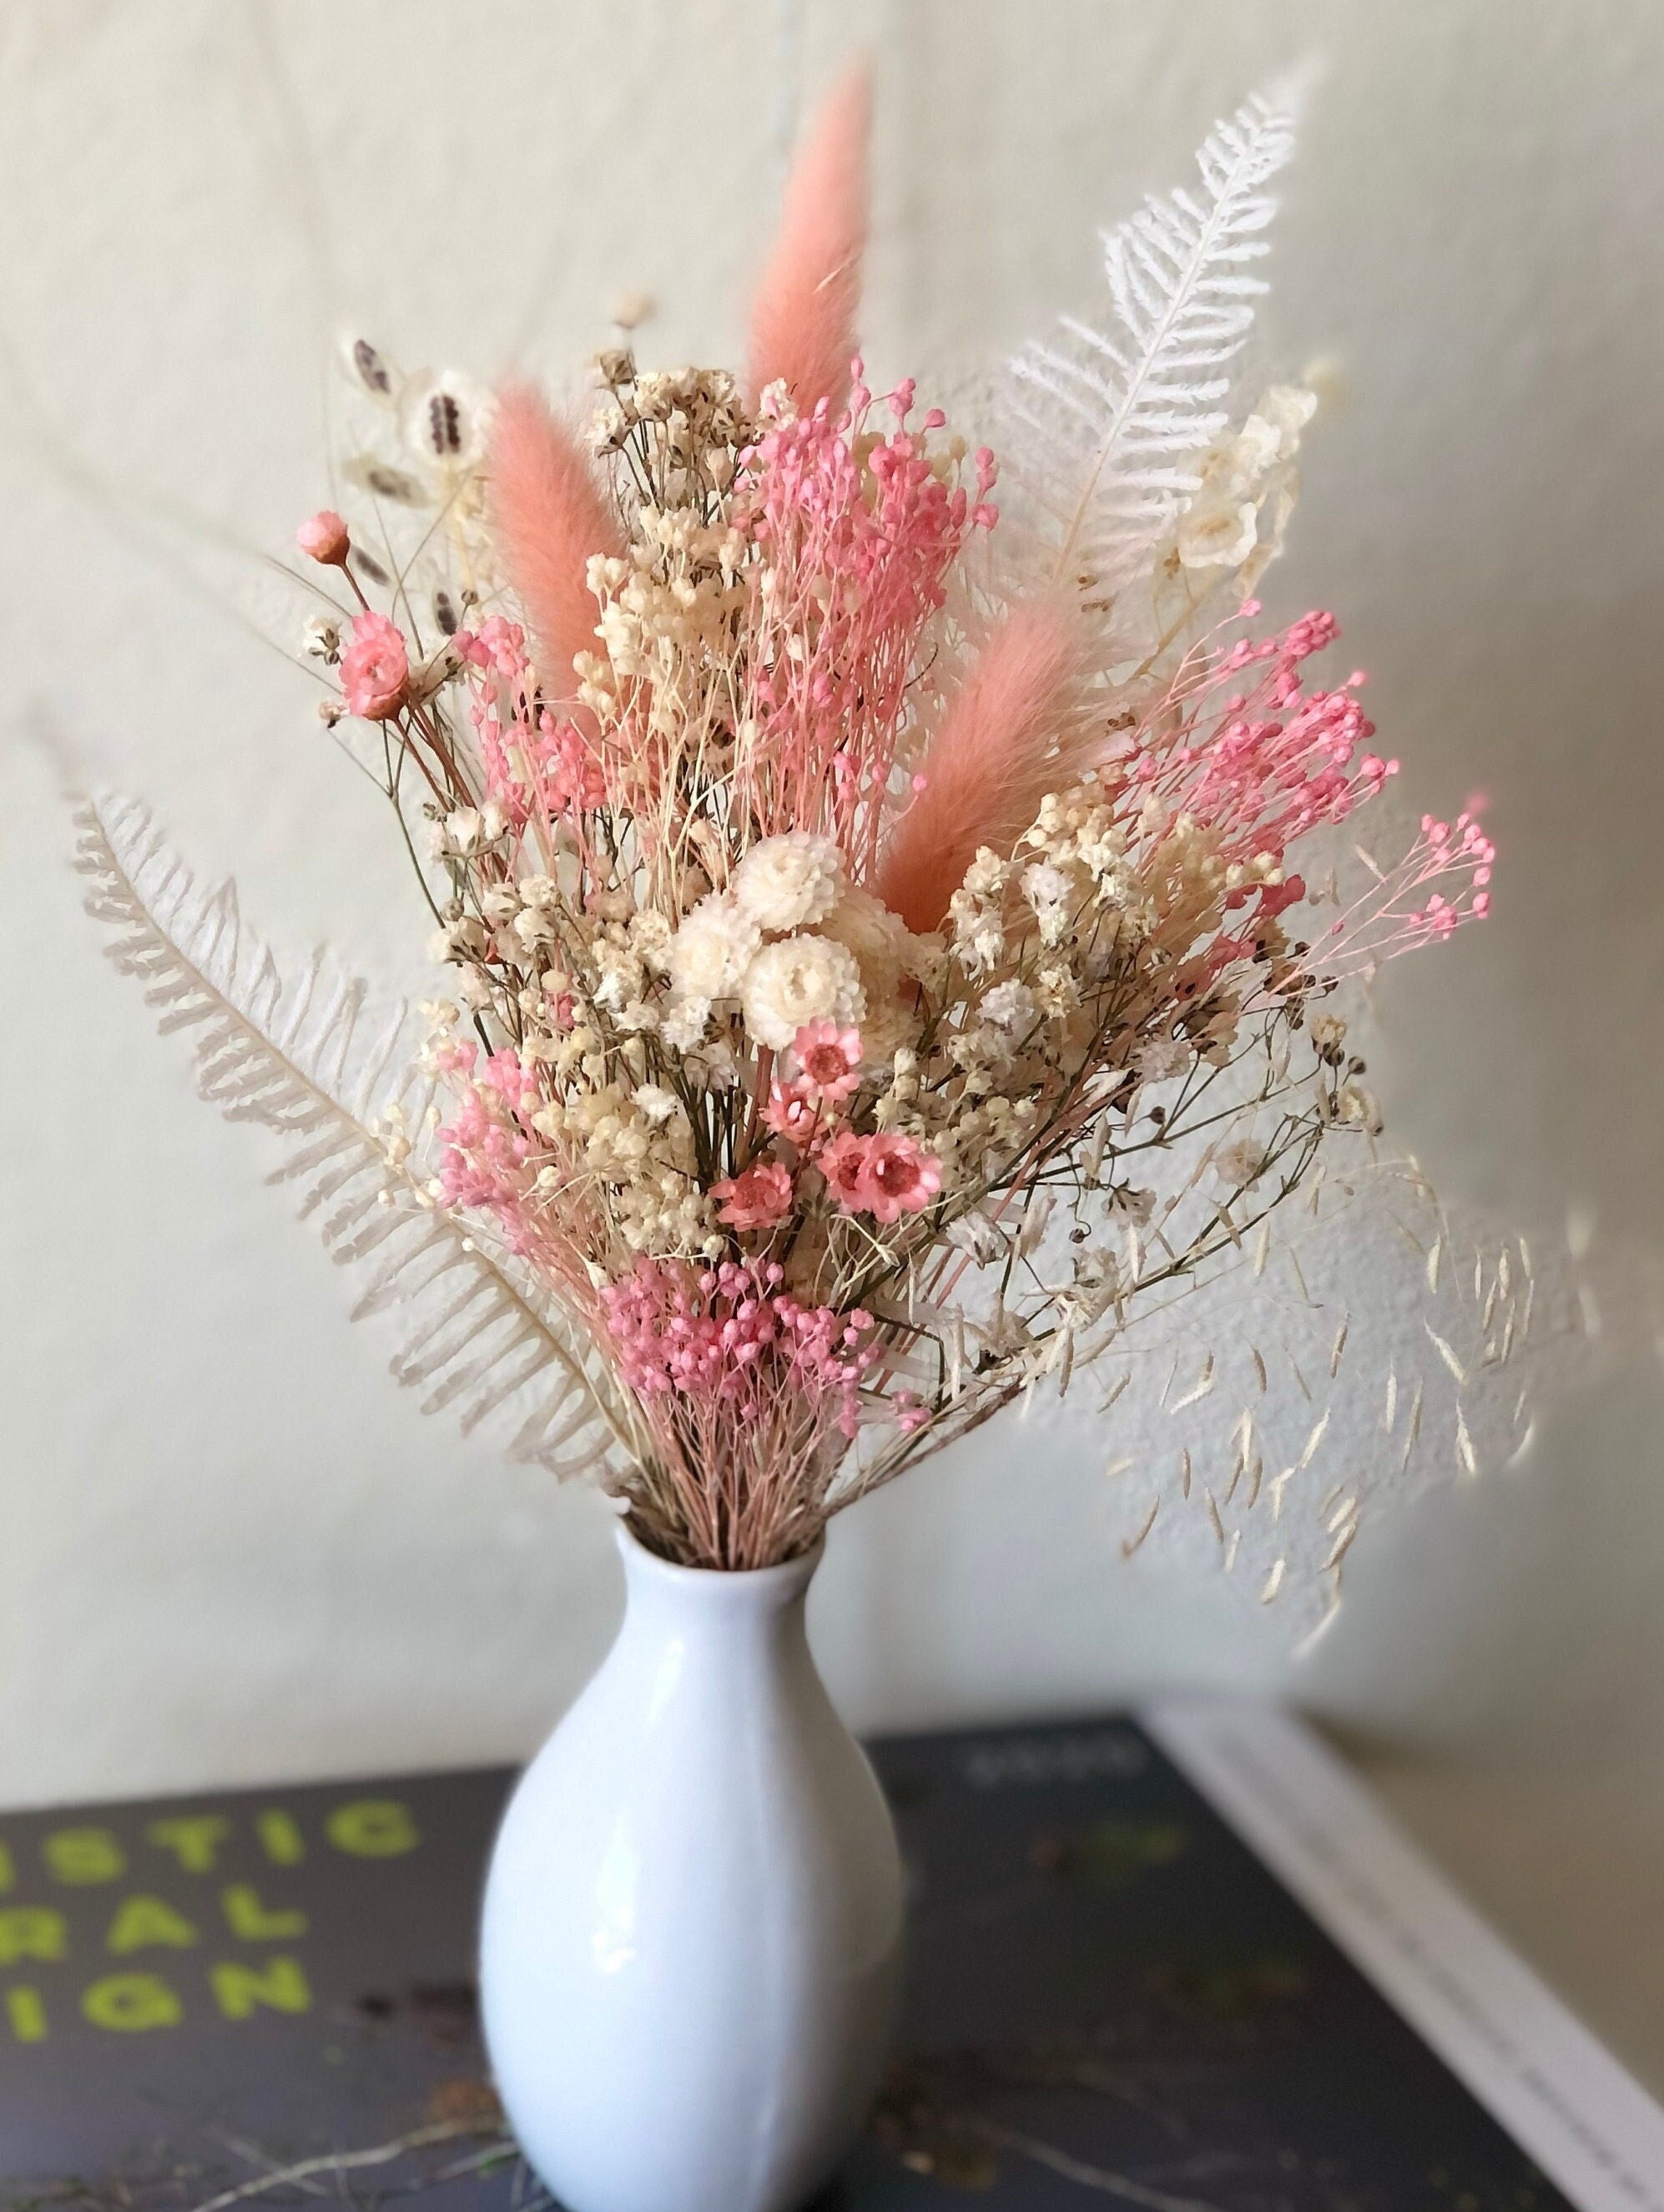 Petite Mini Pink and White Dried Flower Bouquet, Small Dry Floral Bunny  Tails, Everlasting Dry Flowers, Cute Present, Birthday Gift for Her 